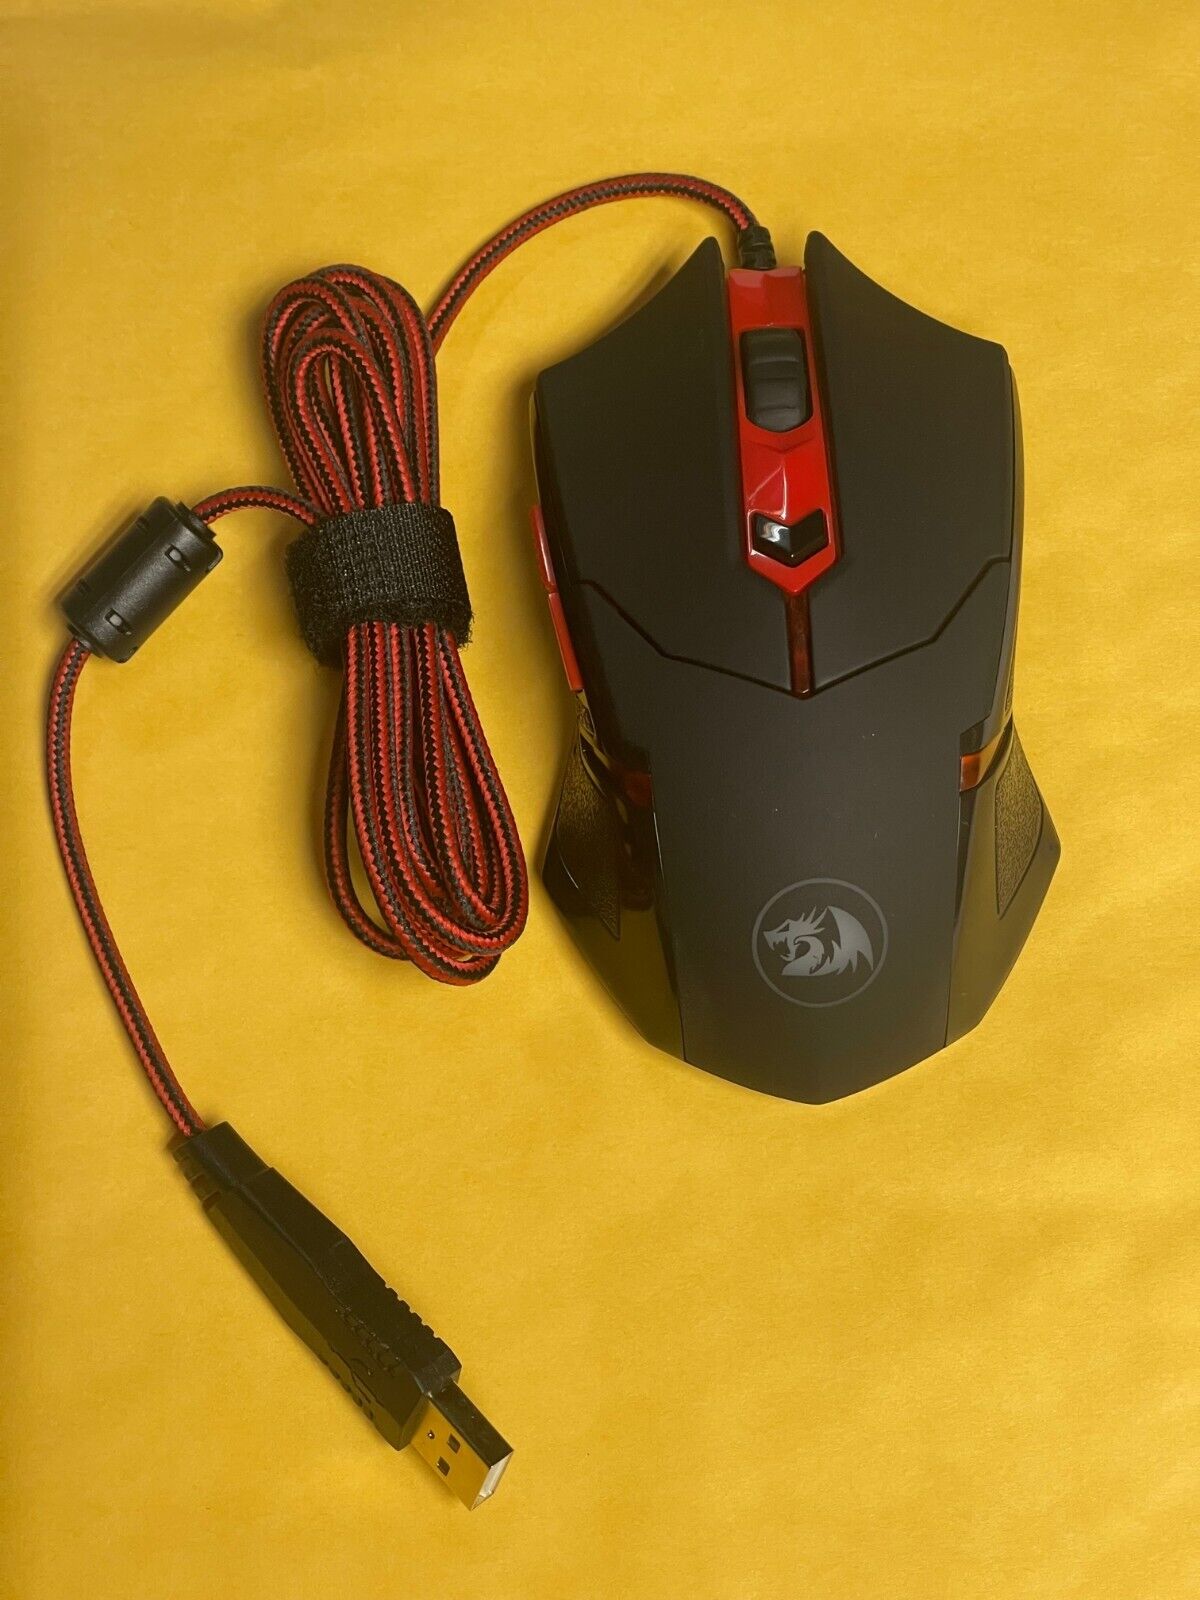 Redragon S101-3 Wired Optical Gaming Mouse 3200 DPI